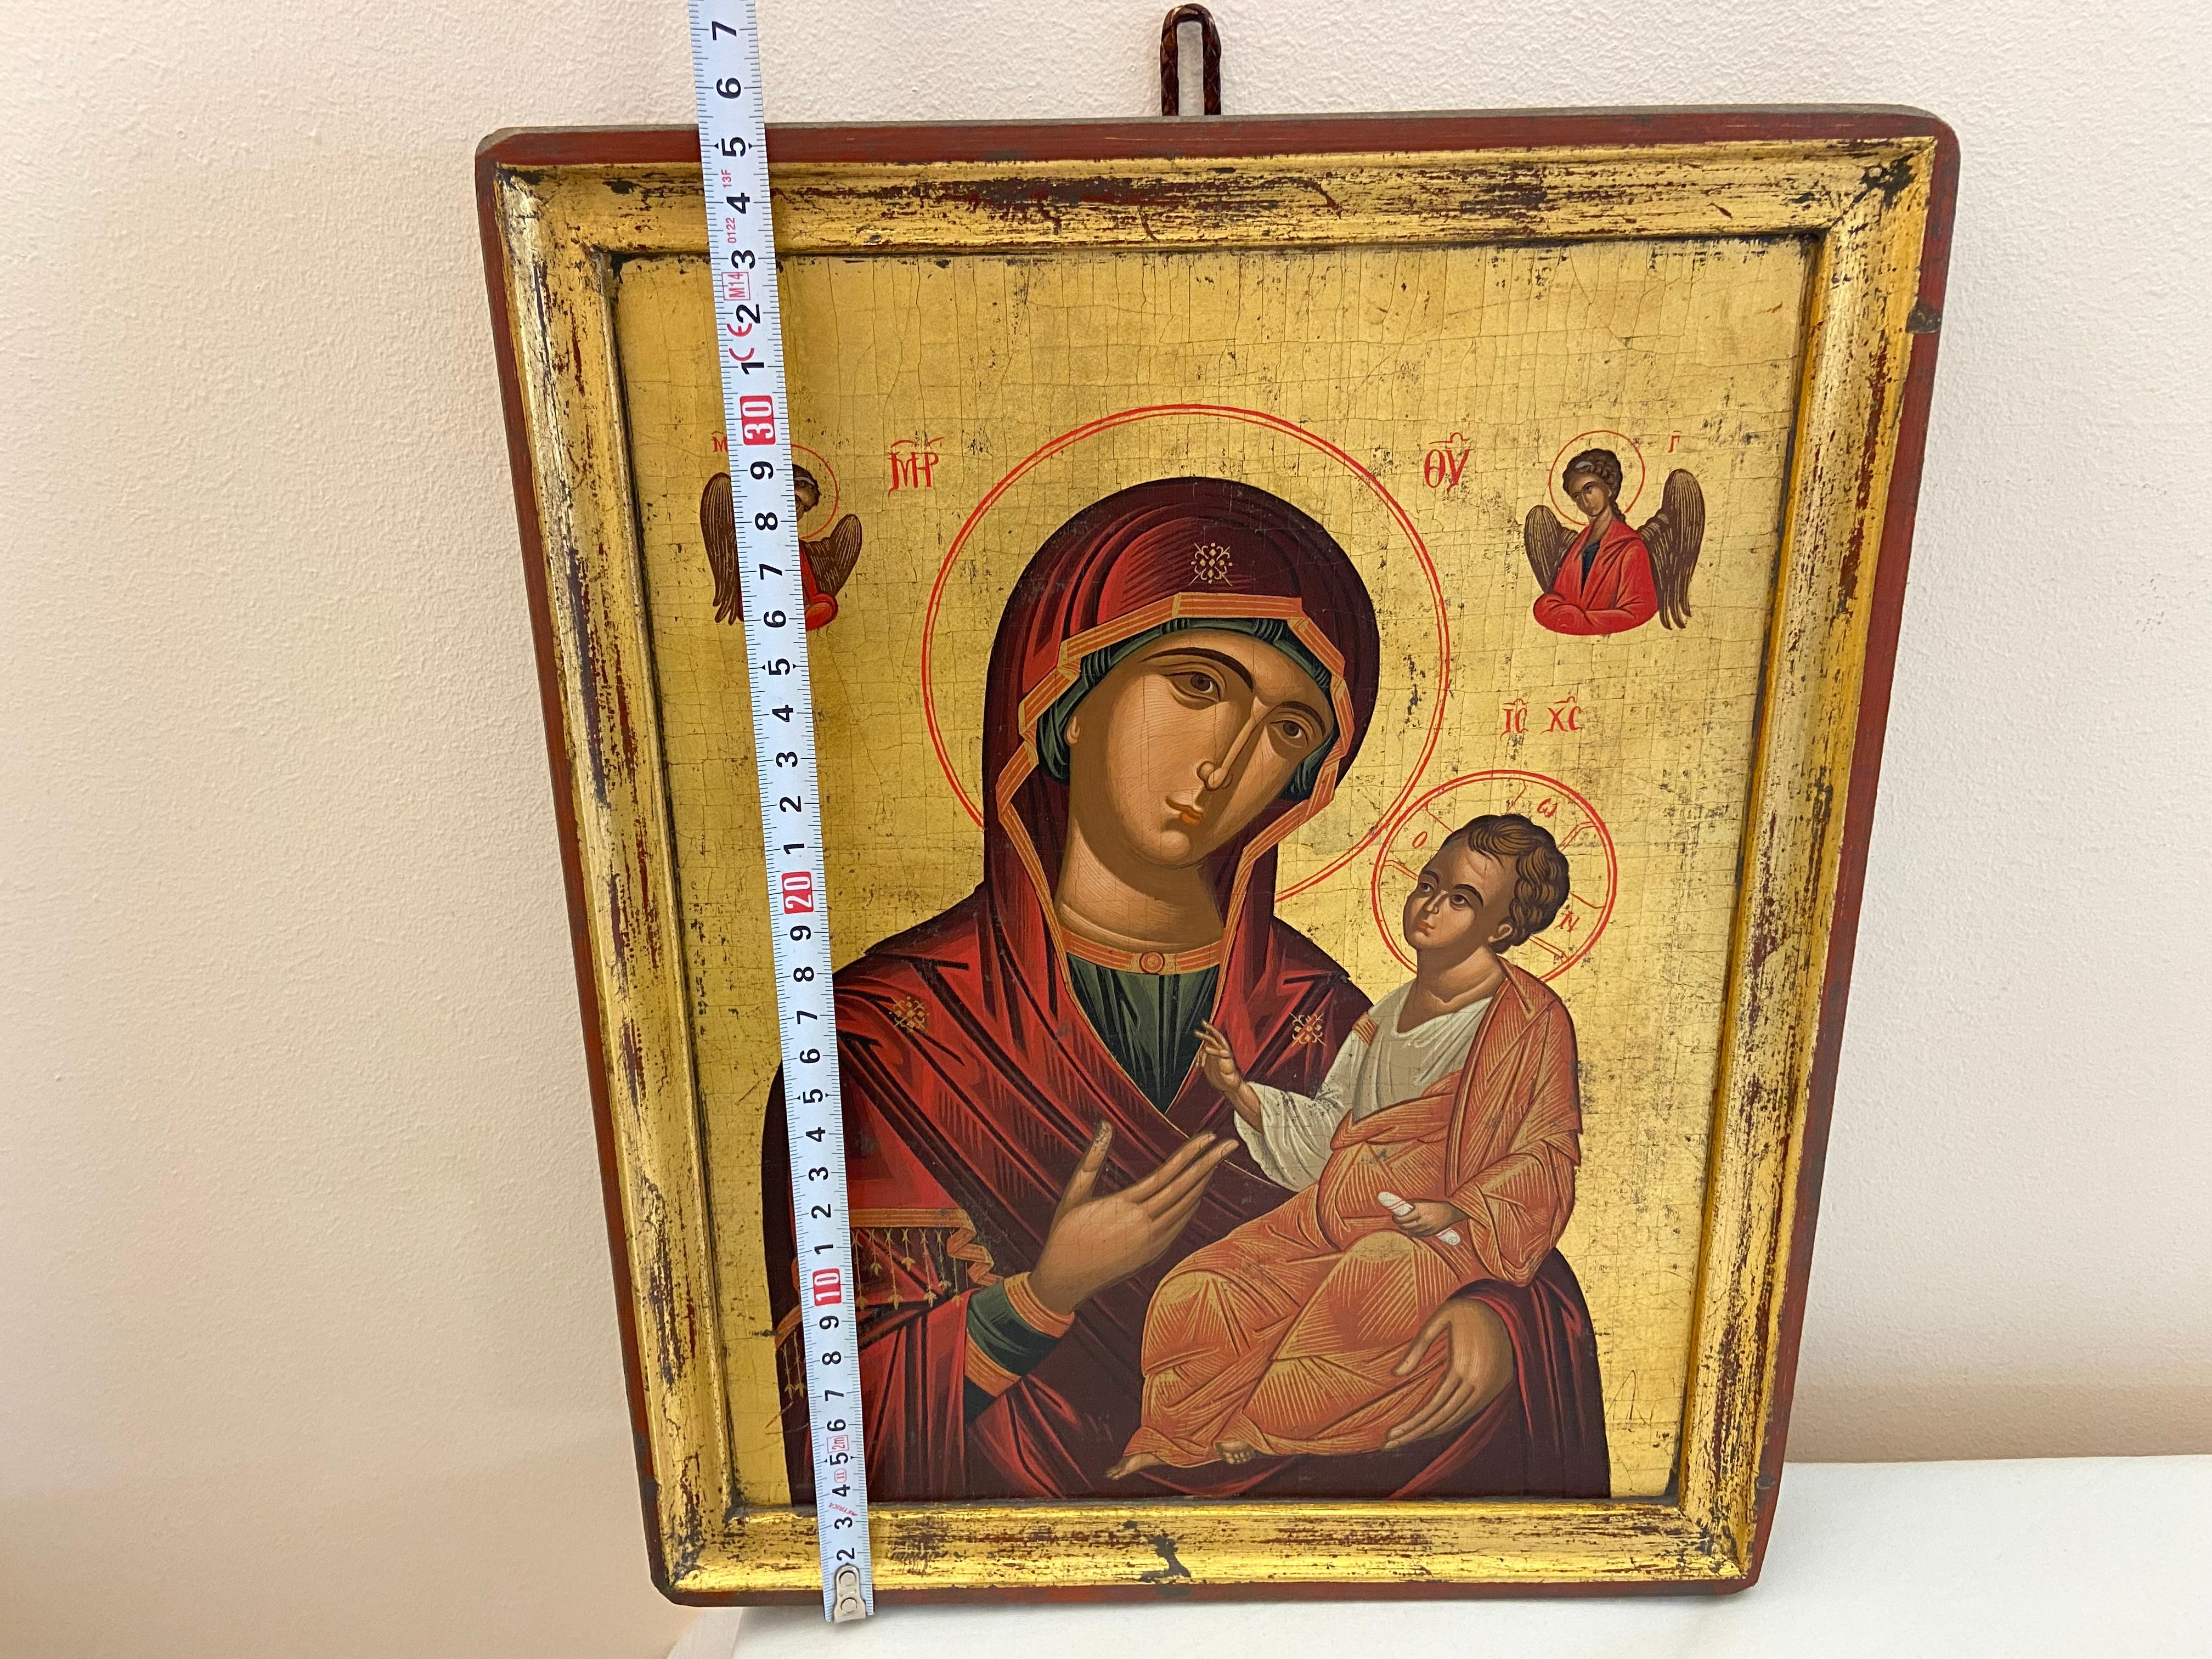 Classical Greek Reproduction of an Old Byzantine Icon, waxed fabric, seasoned wood